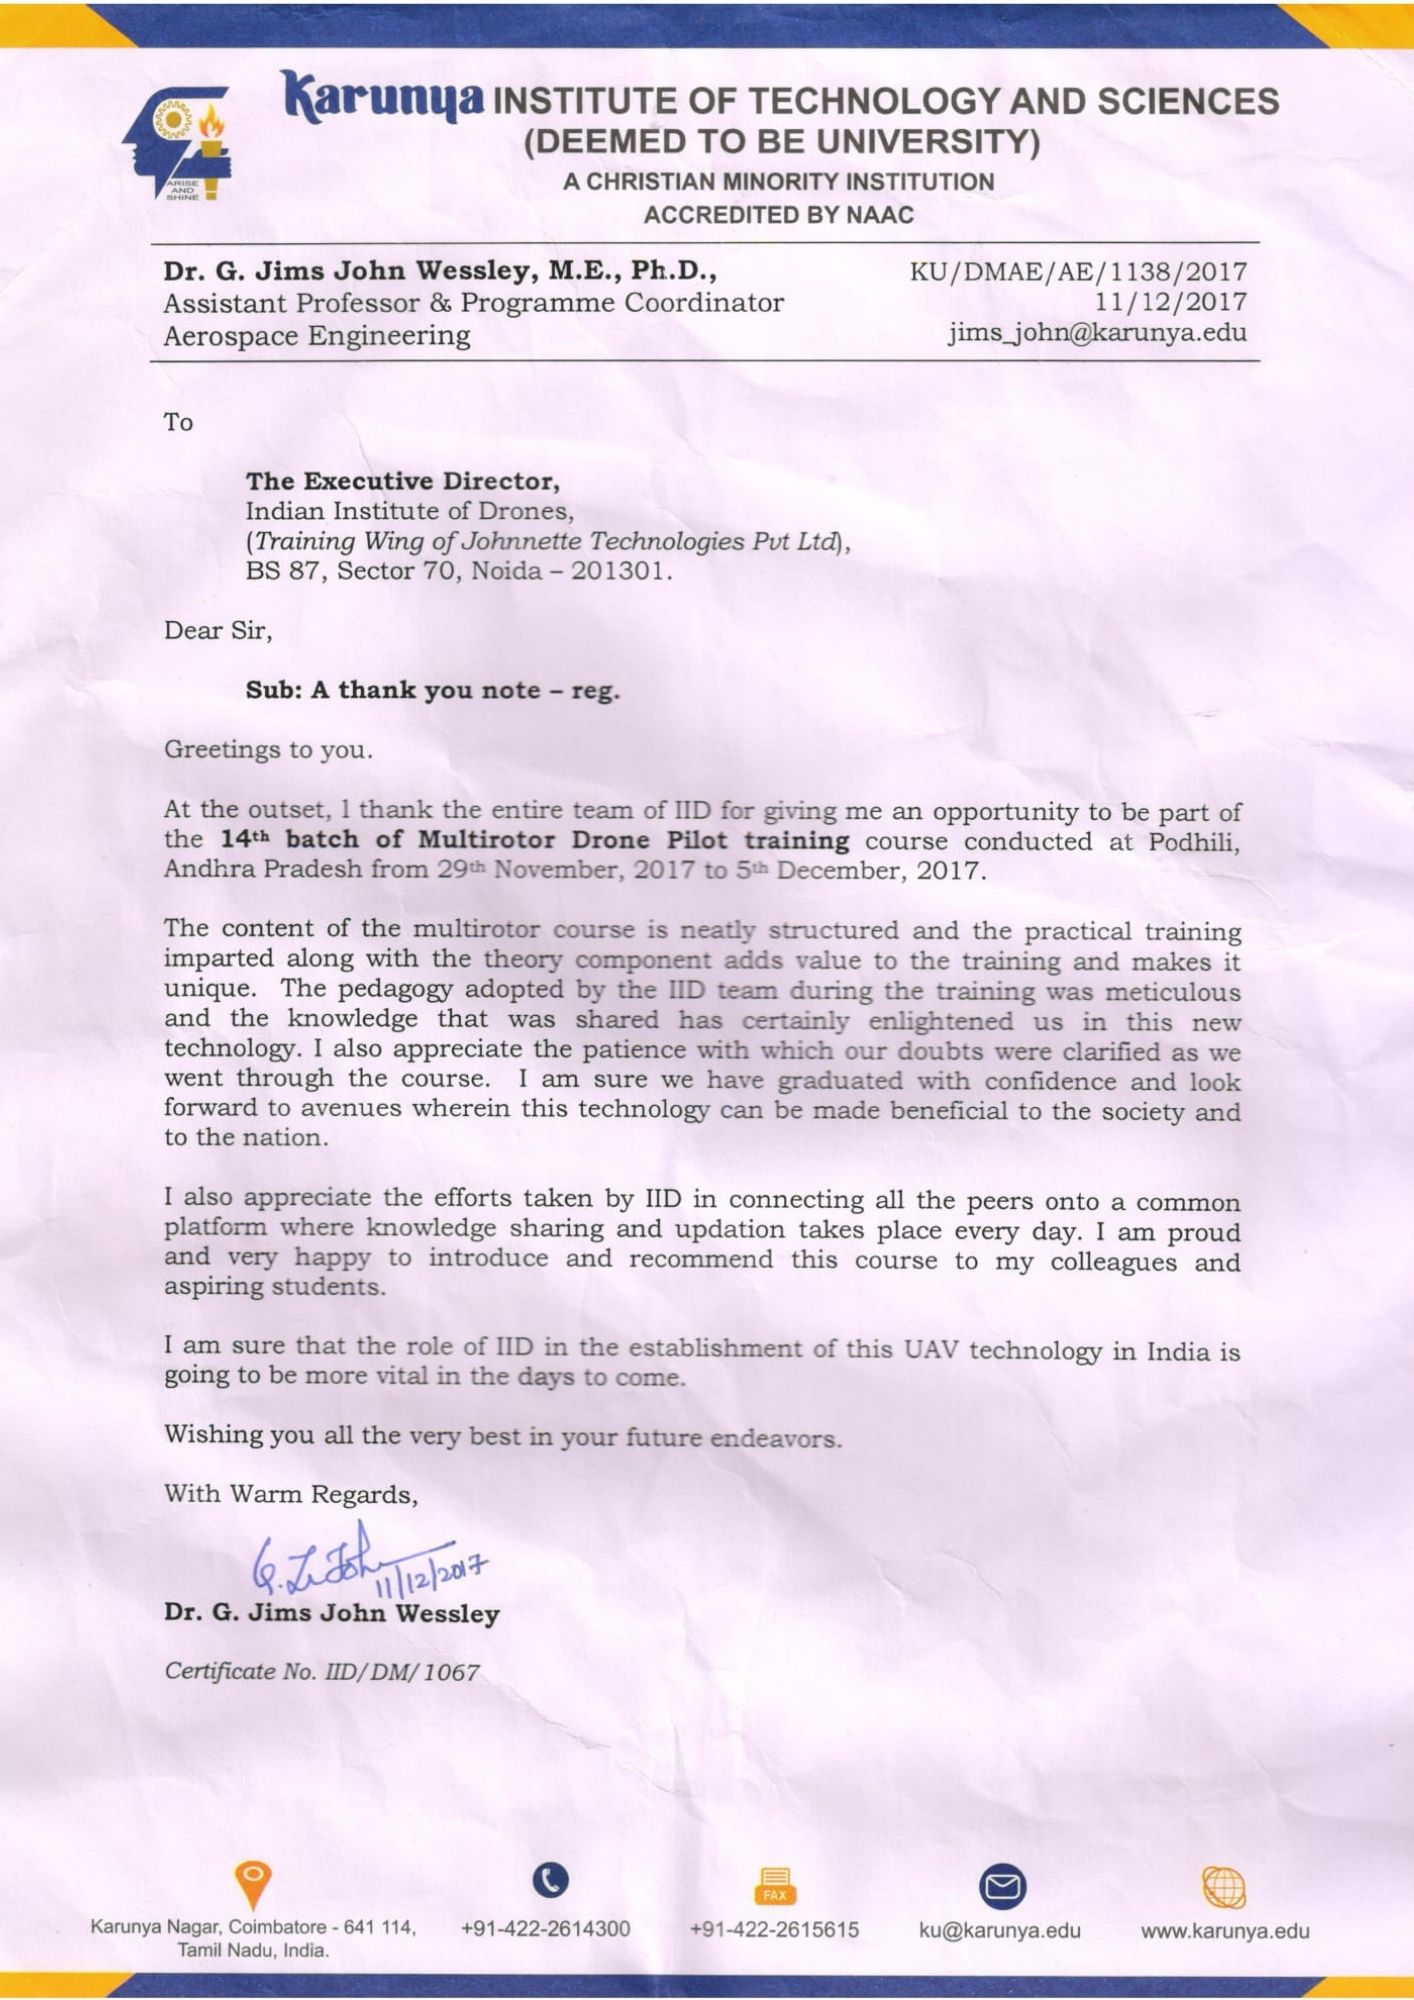 Satisfactory Letter for Drone Training Received from Karunya Institute of Technology and Sciences